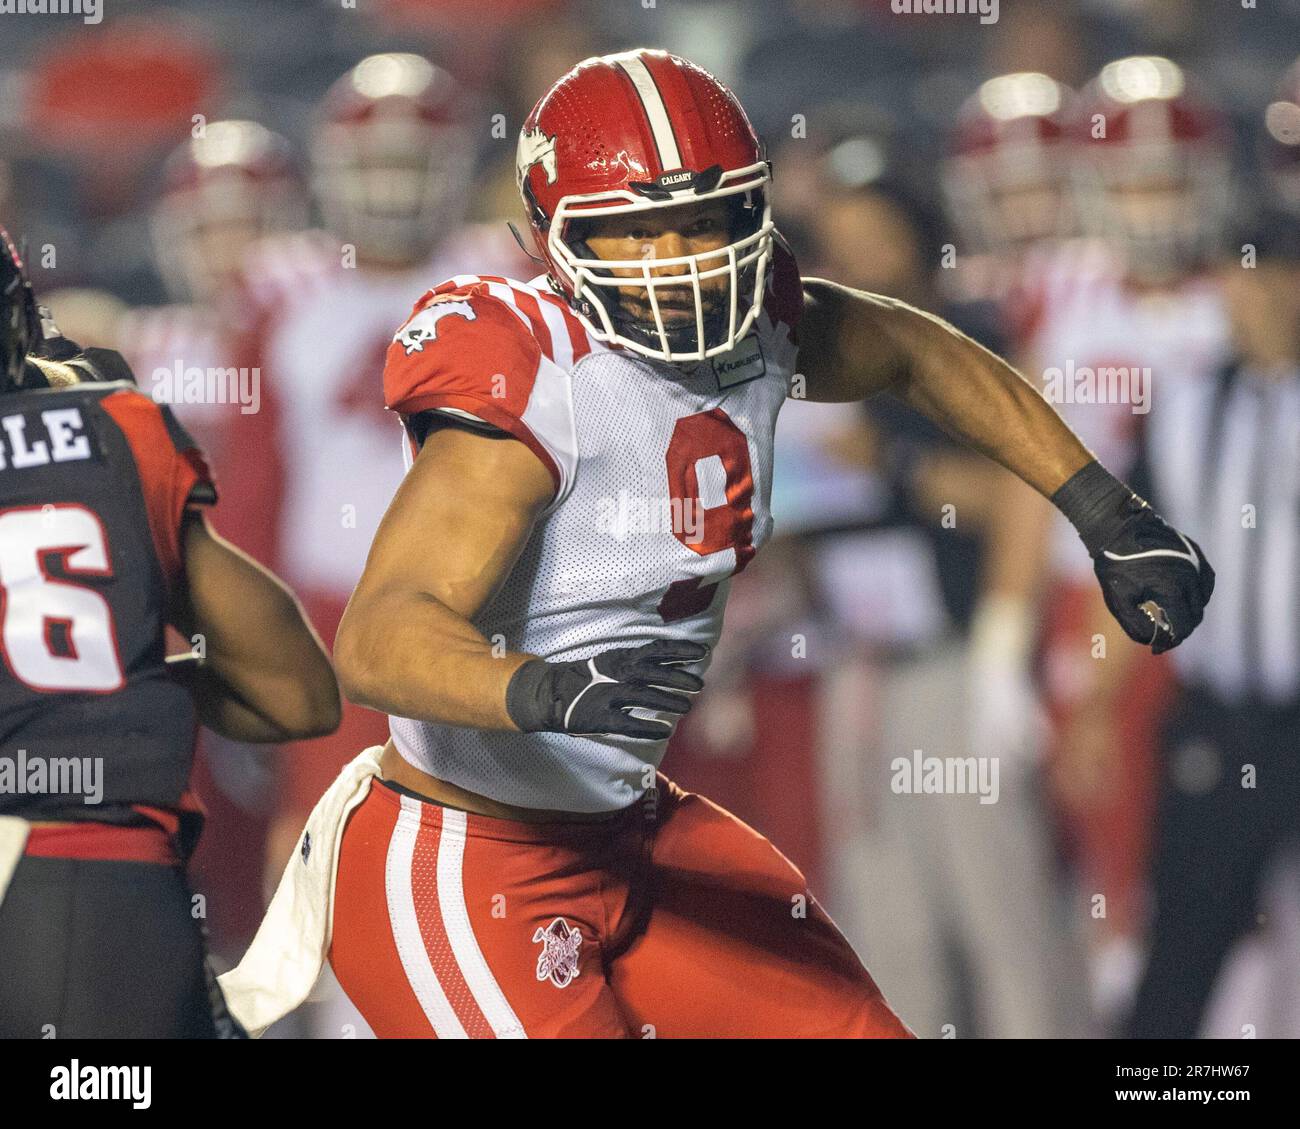 (Ottawa, Canada---15 June 2023)  James Vaughters (9) of the Calgary Stampeders in Canadian Football League (CFL) regular season action between the Calgary Stampeders at the Ottawa Redblacks. Photograph Copyright 2023 Sean Burges / Mundo Sport Images. Stock Photo